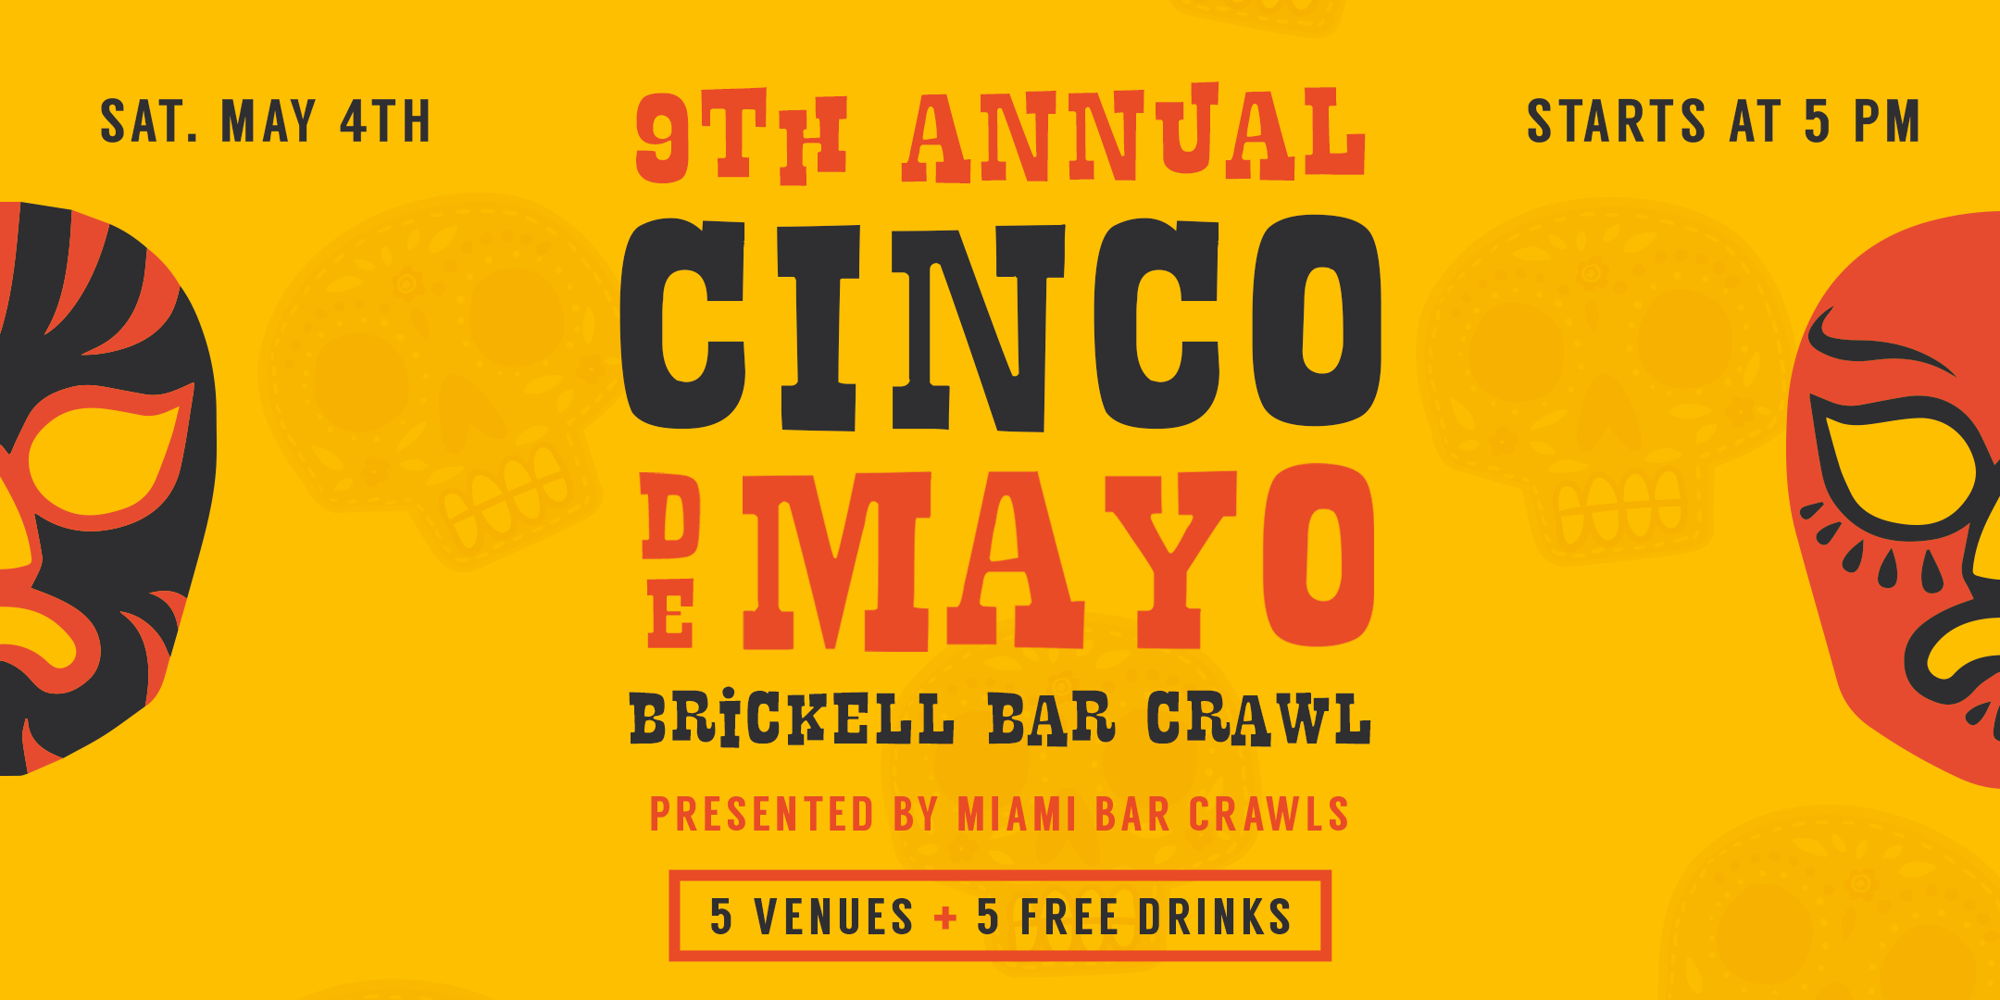 9th Annual Cinco de Mayo Bar Crawl in Brickell - Day 1 promotional image